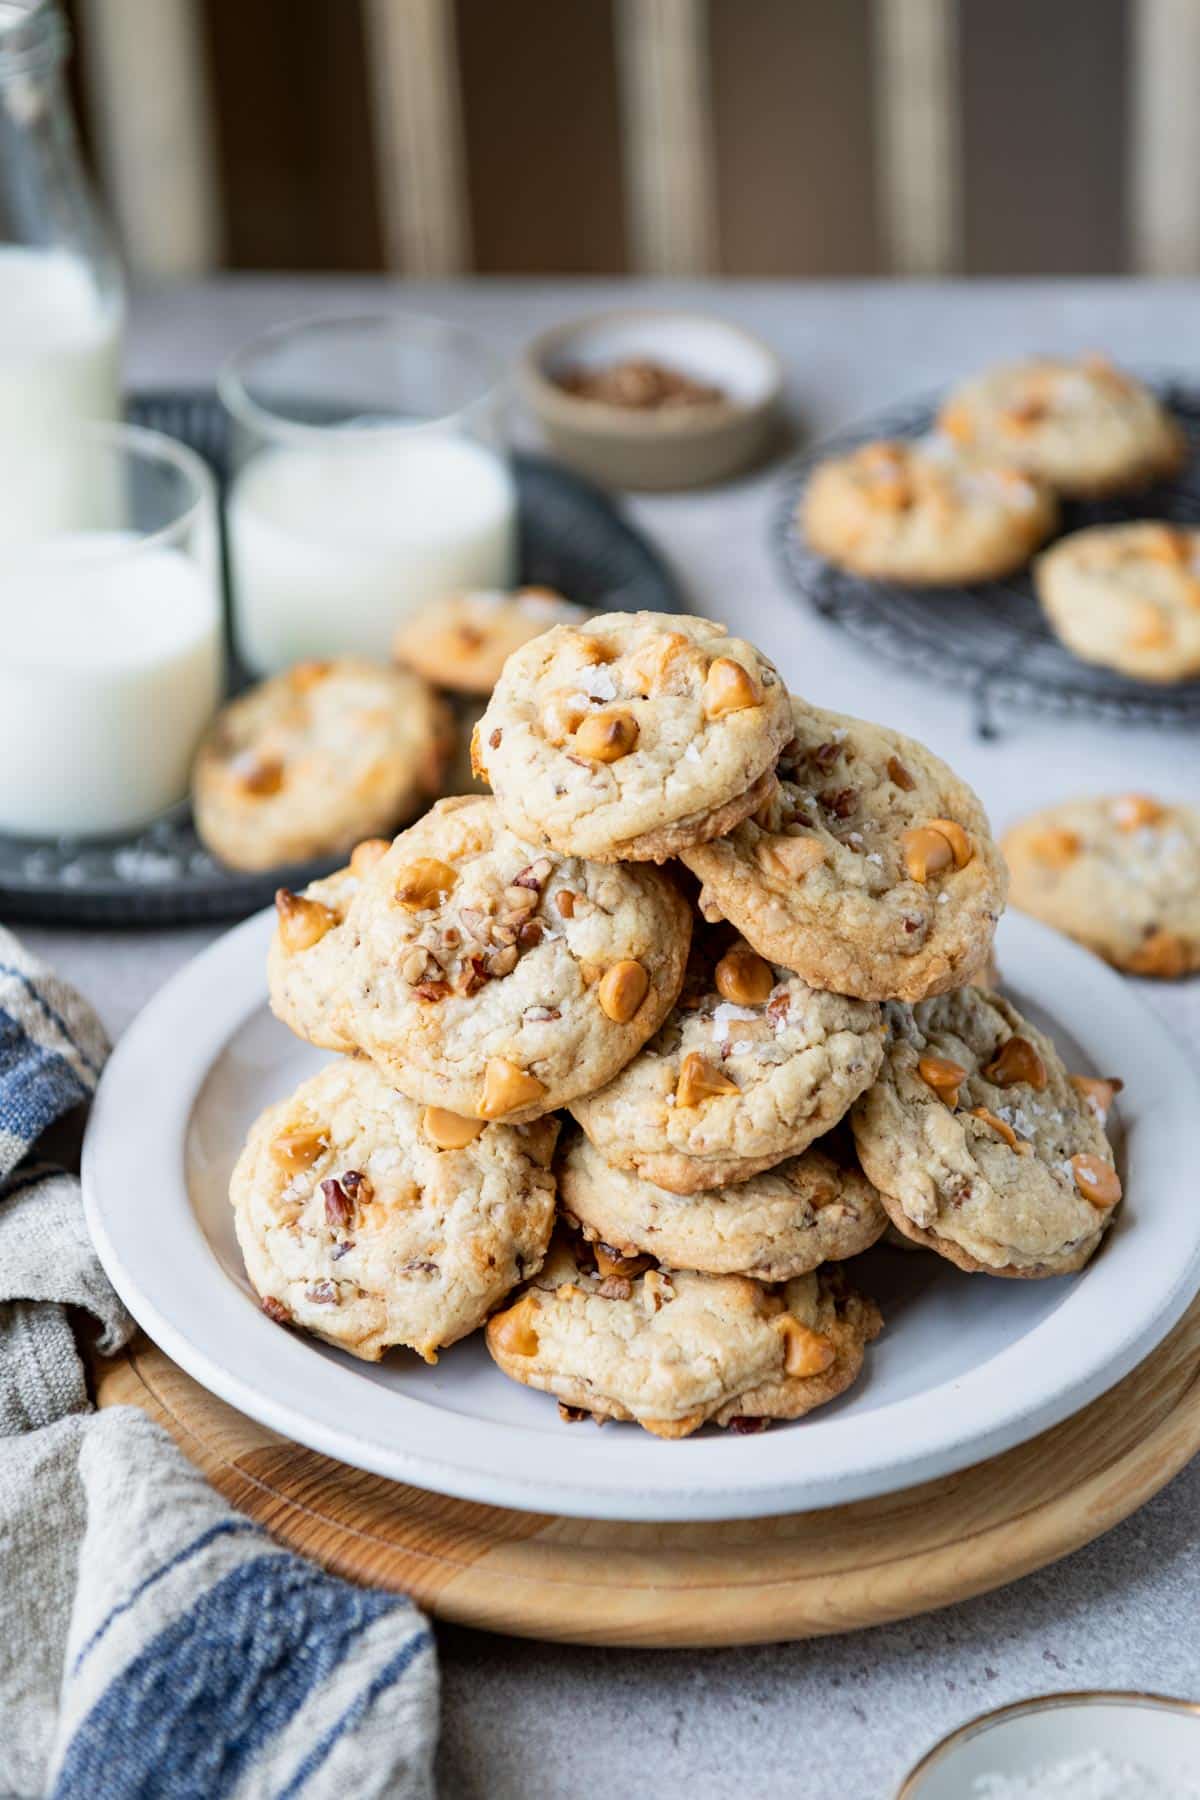 Plate of salted butterscotch cookies with pecans.